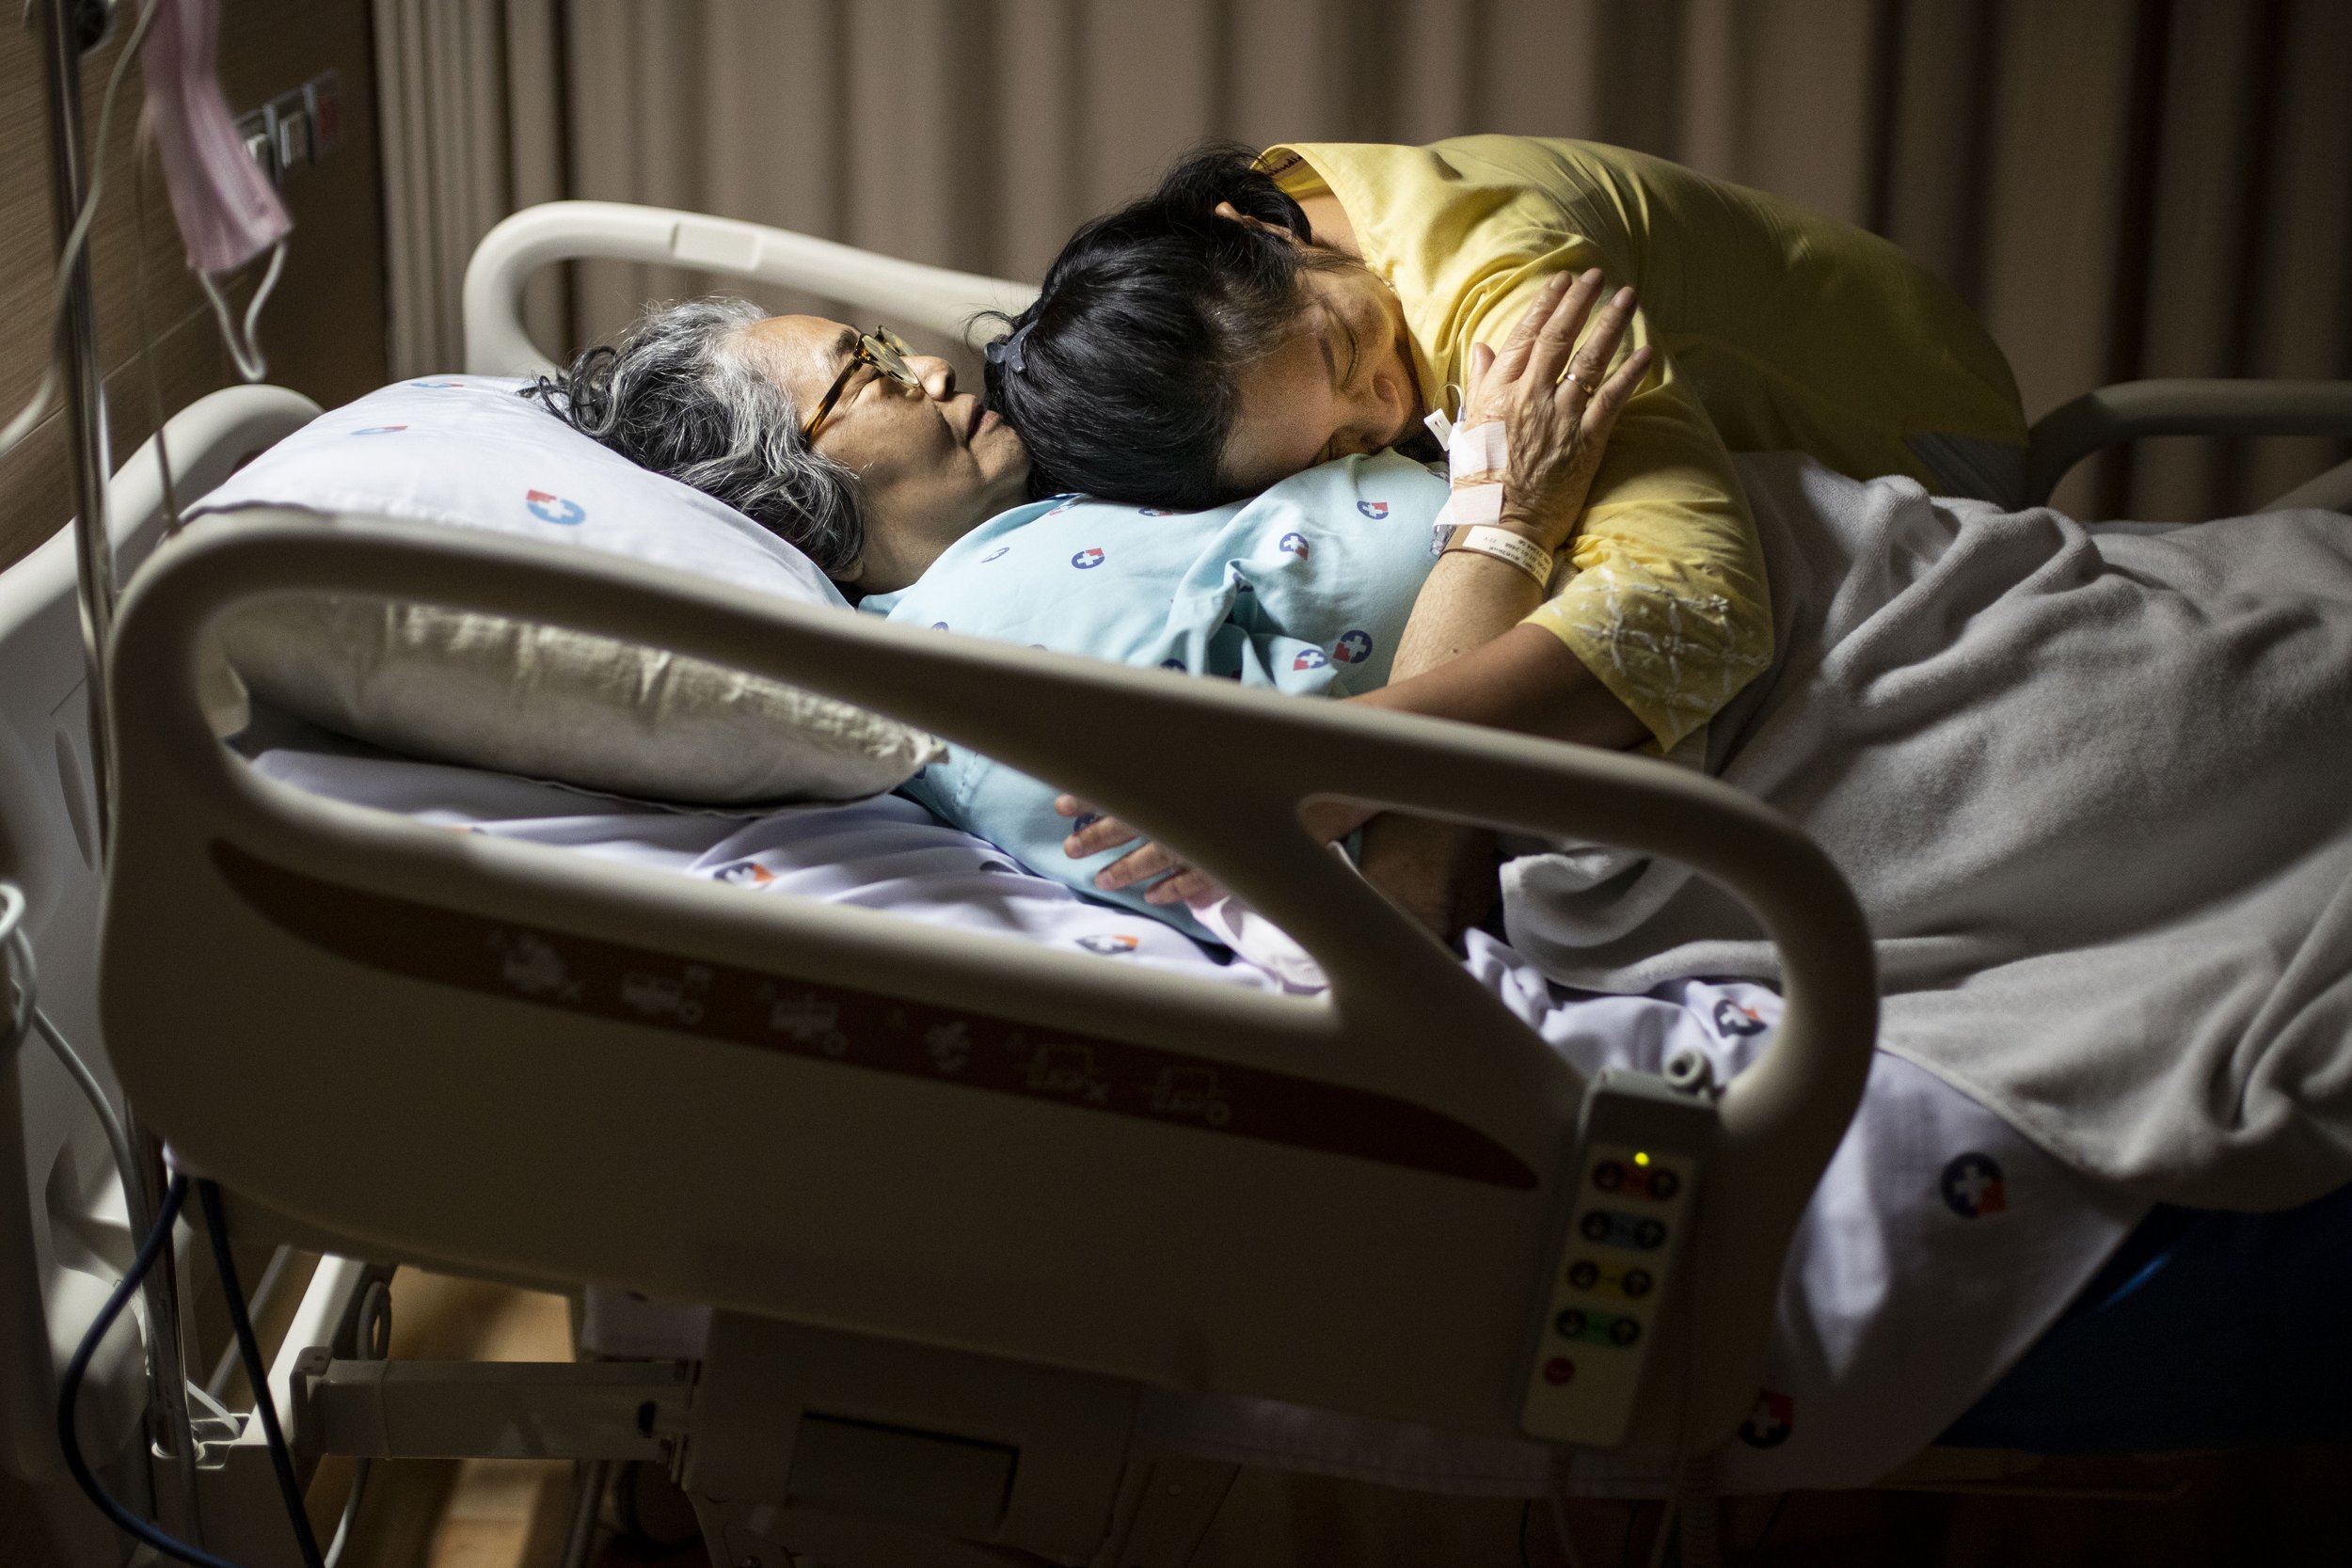  (right) Chutatip “Nok” Suntaranon hugs her mother Kalaya Suntaranon while she was hospitalized in Trang, Thailand on Saturday, April 16, 2022.  "My mother's name is Kalaya, which means beautiful lady," Nok said. "She is the most beautiful lady I eve